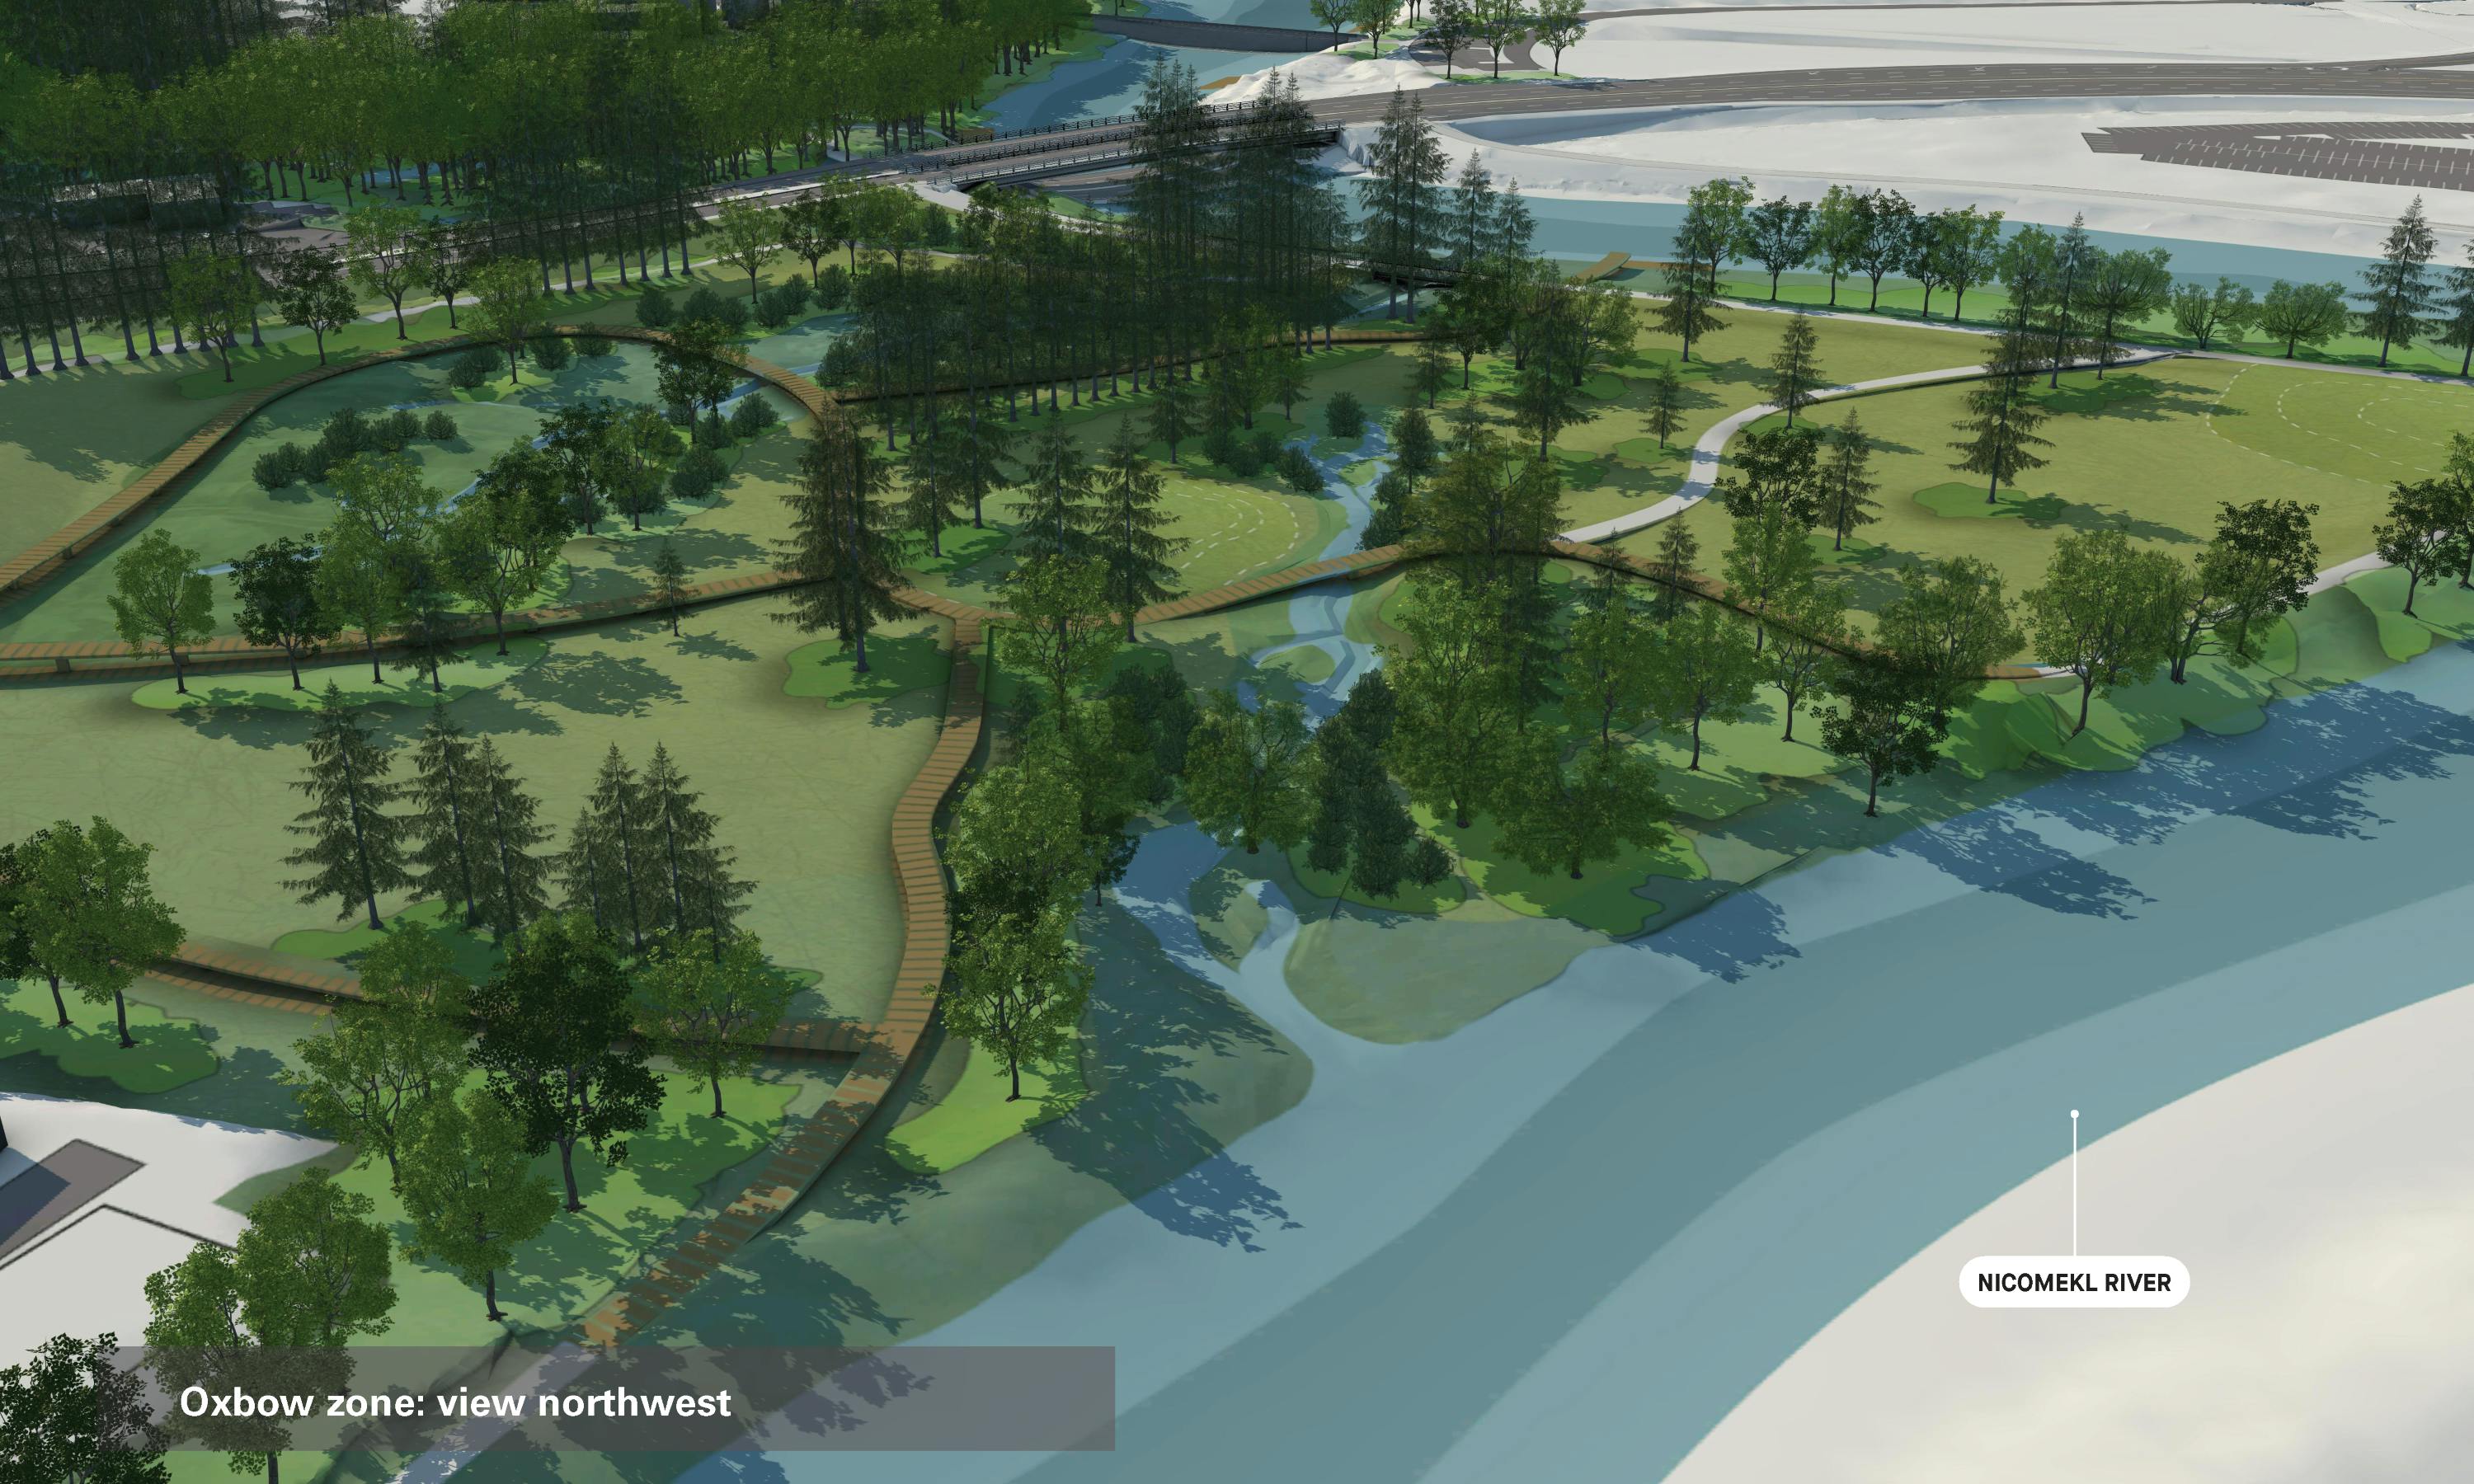 Rendering of future oxbow zone